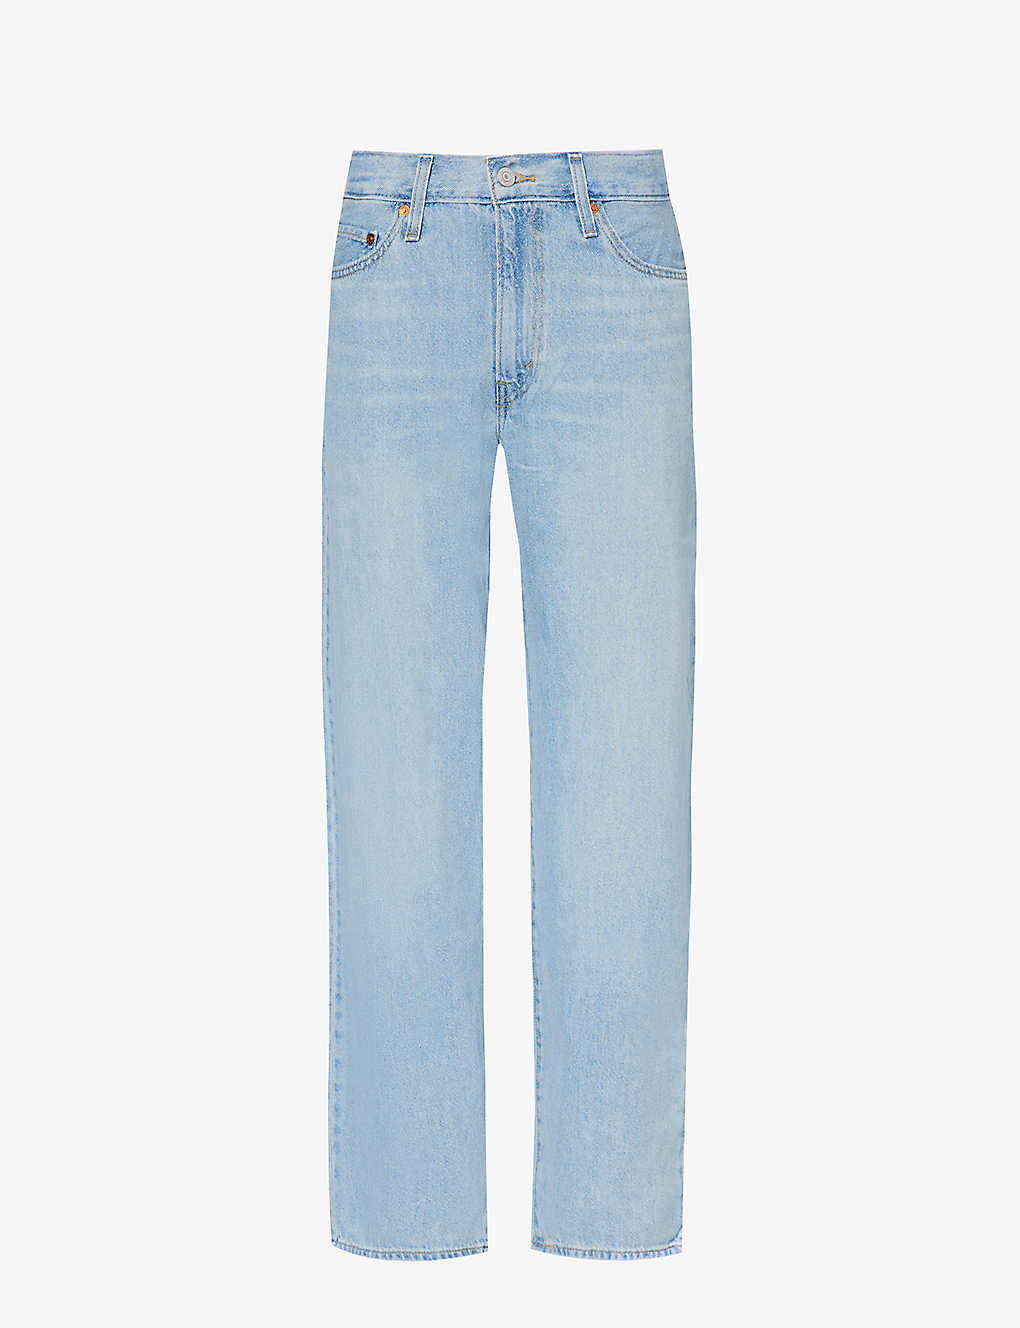 Shop Levi's Levis Women's Make A Difference Lb Baggy Dad Straight-leg Mid-rise Jeans